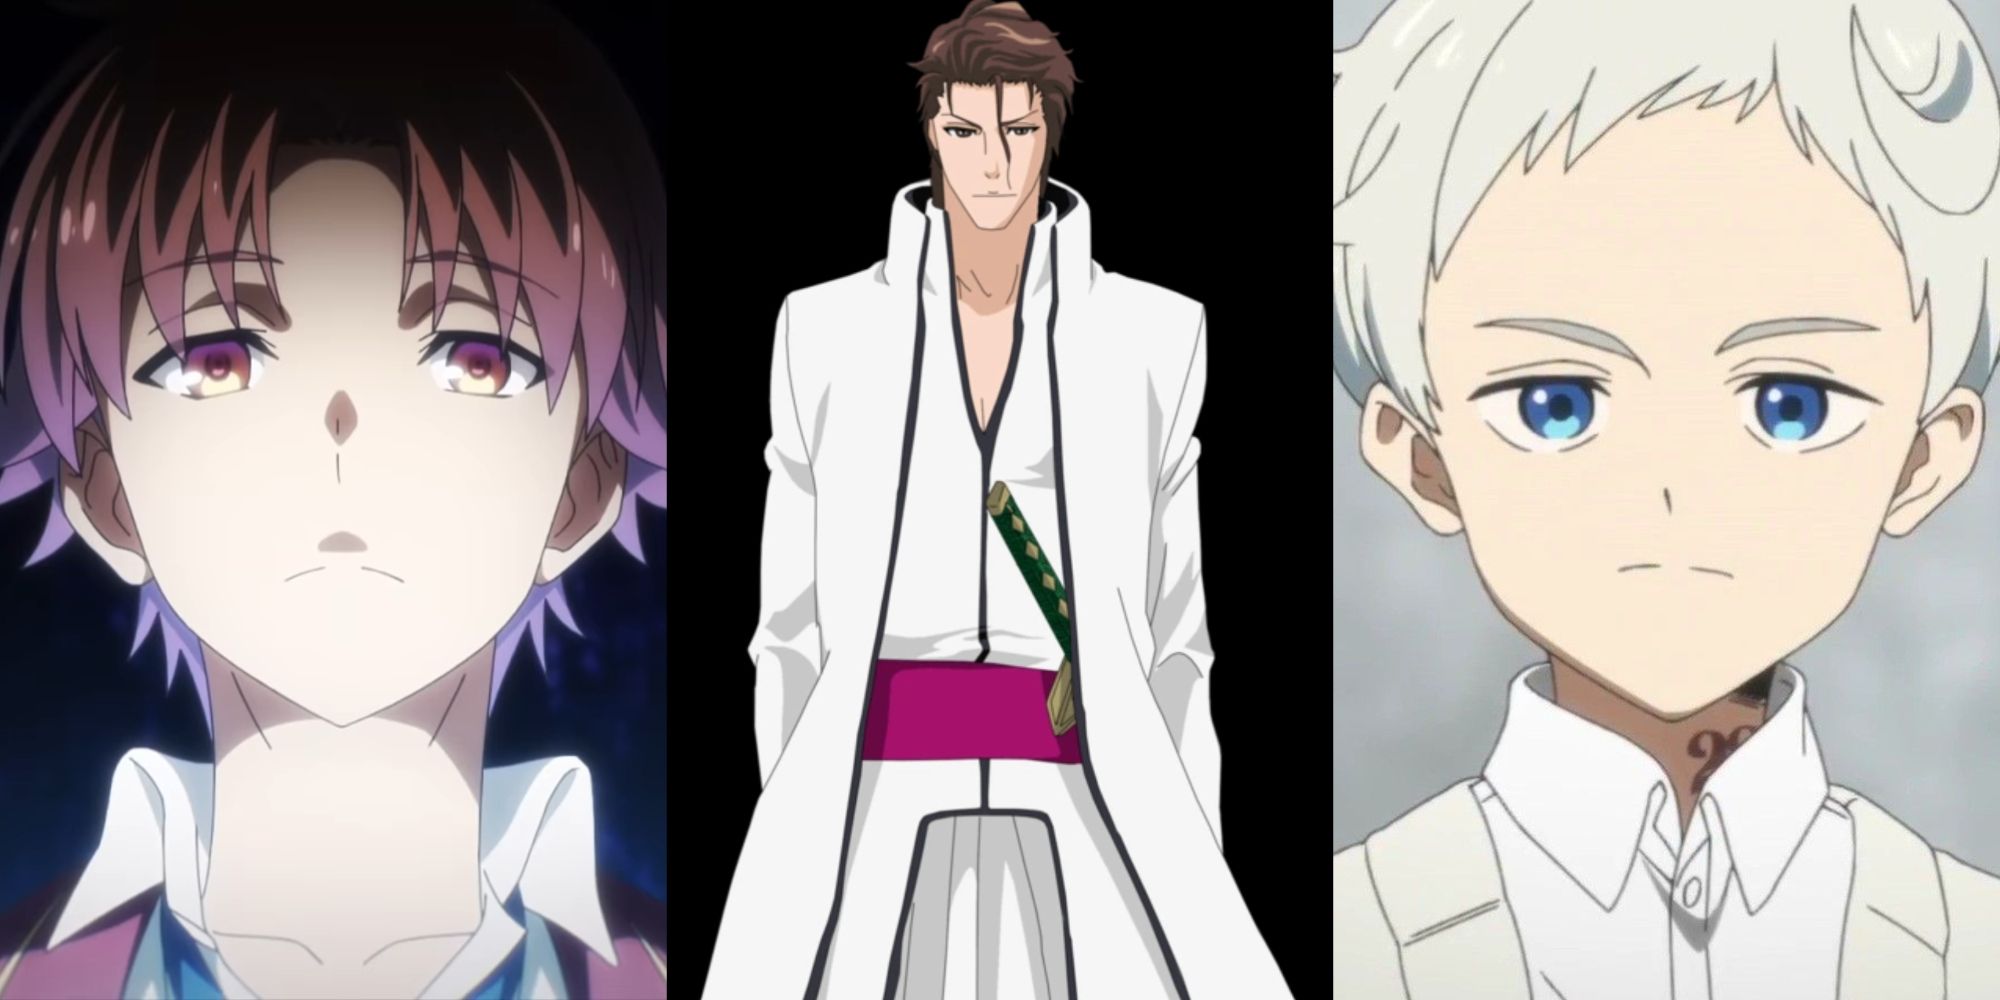 Classroom Of The Elite: Smartest Characters In The Anime, Ranked